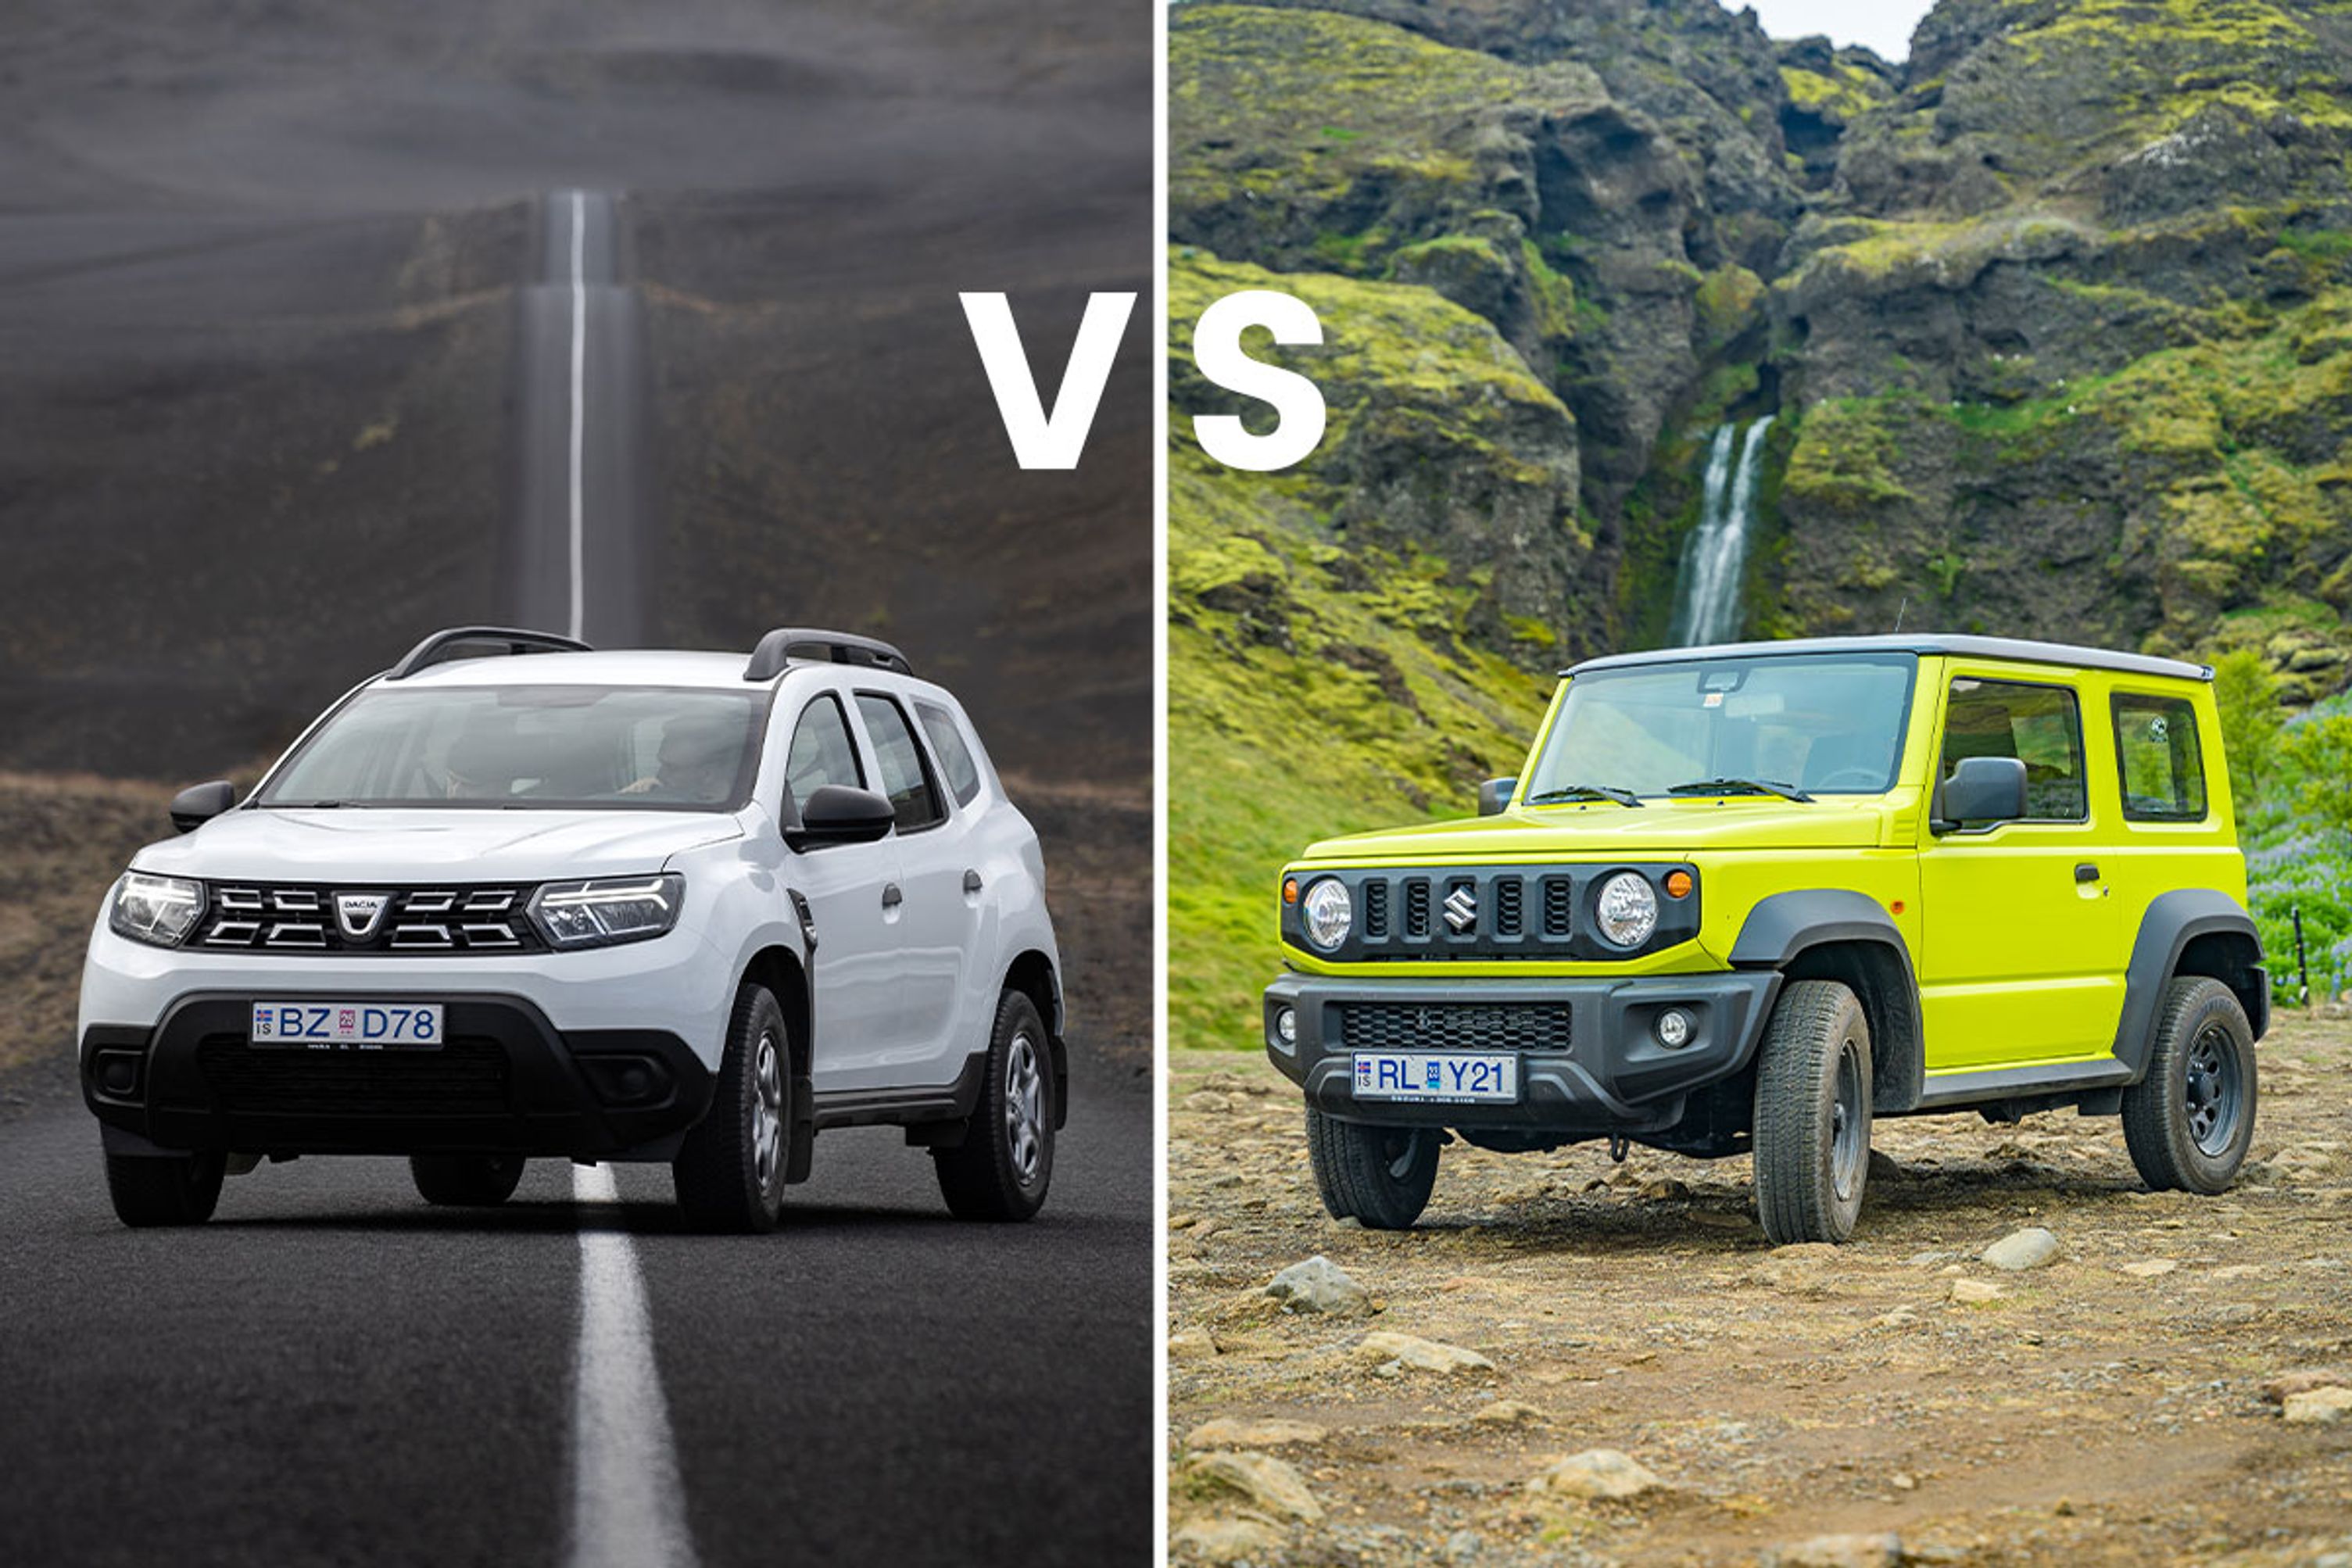 he Dacia Duster and Suzuki Jimny parked side by side, showcasing their distinct off-road capabilities